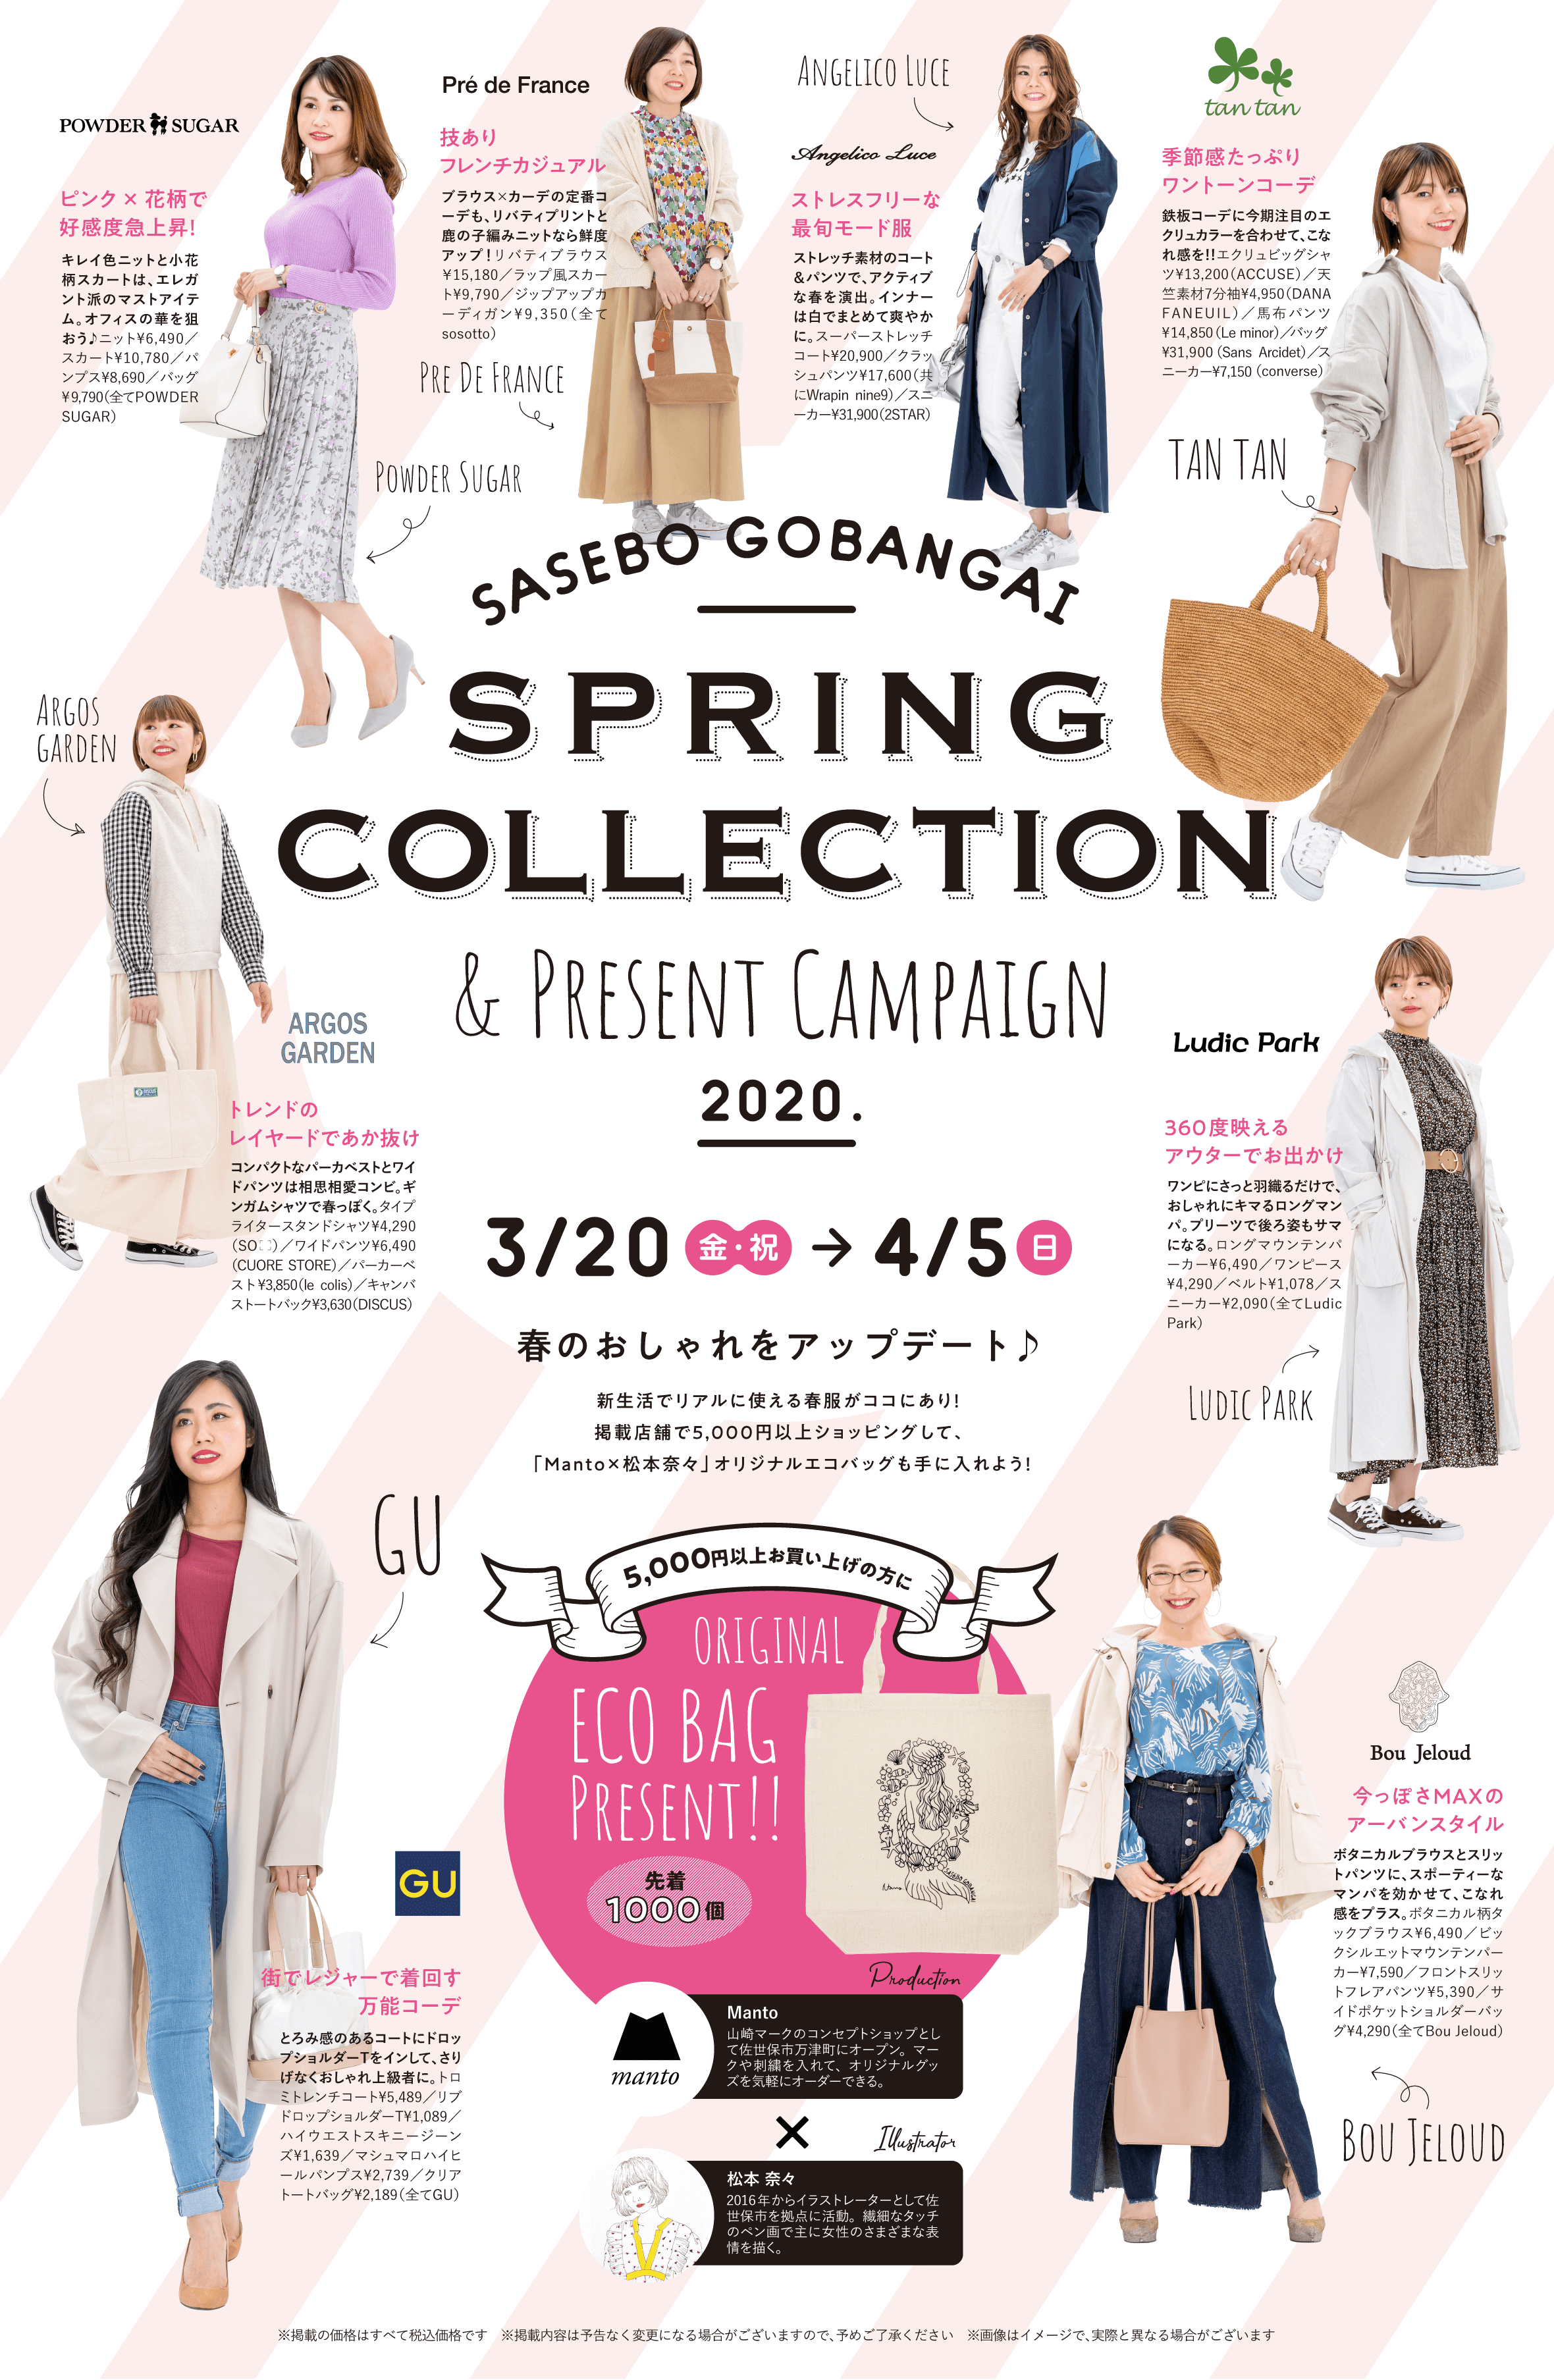 SPRING COLLECTION & PRESENT CAMPAIGN 3/20-4/5